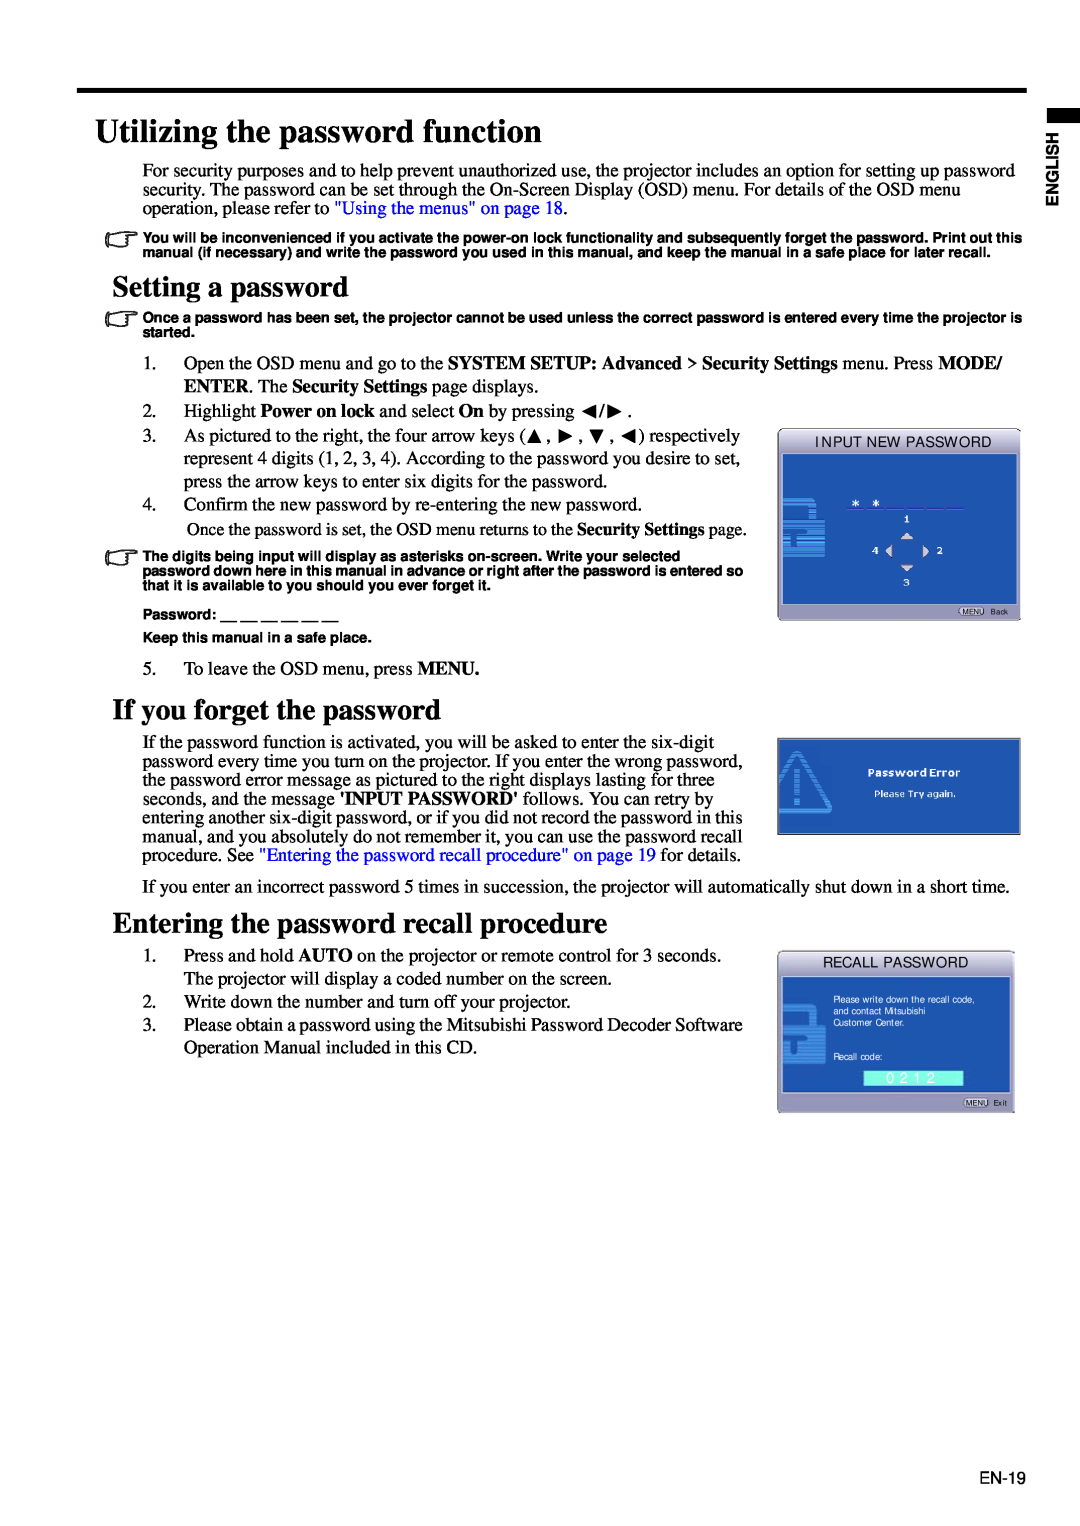 Mitsubishi Electronics XD95U user manual Utilizing the password function, Setting a password, If you forget the password 